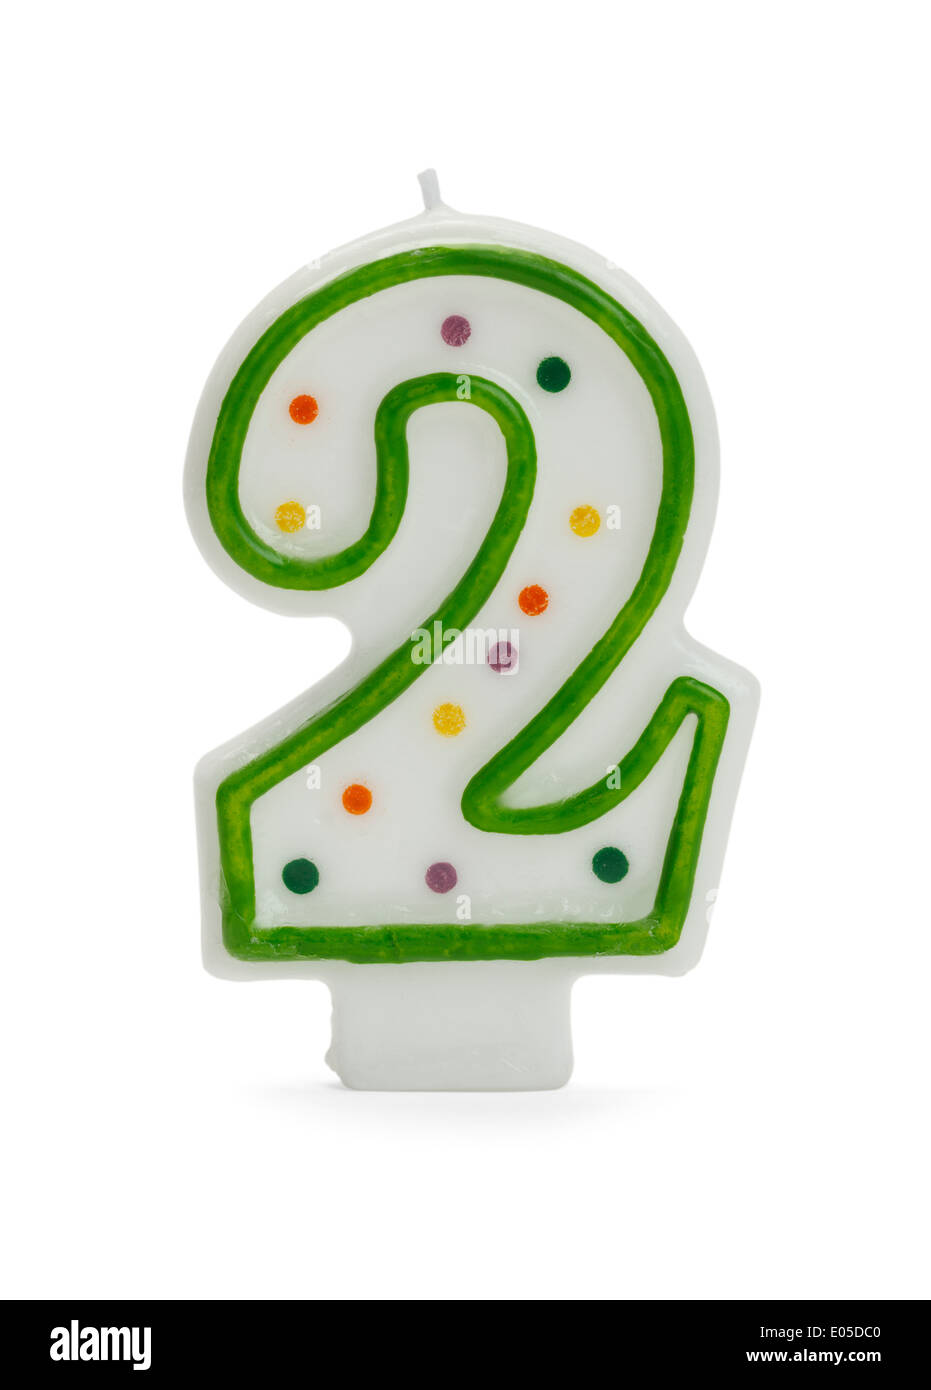 Second Birthday Candle Isolated On White Background. Stock Photo